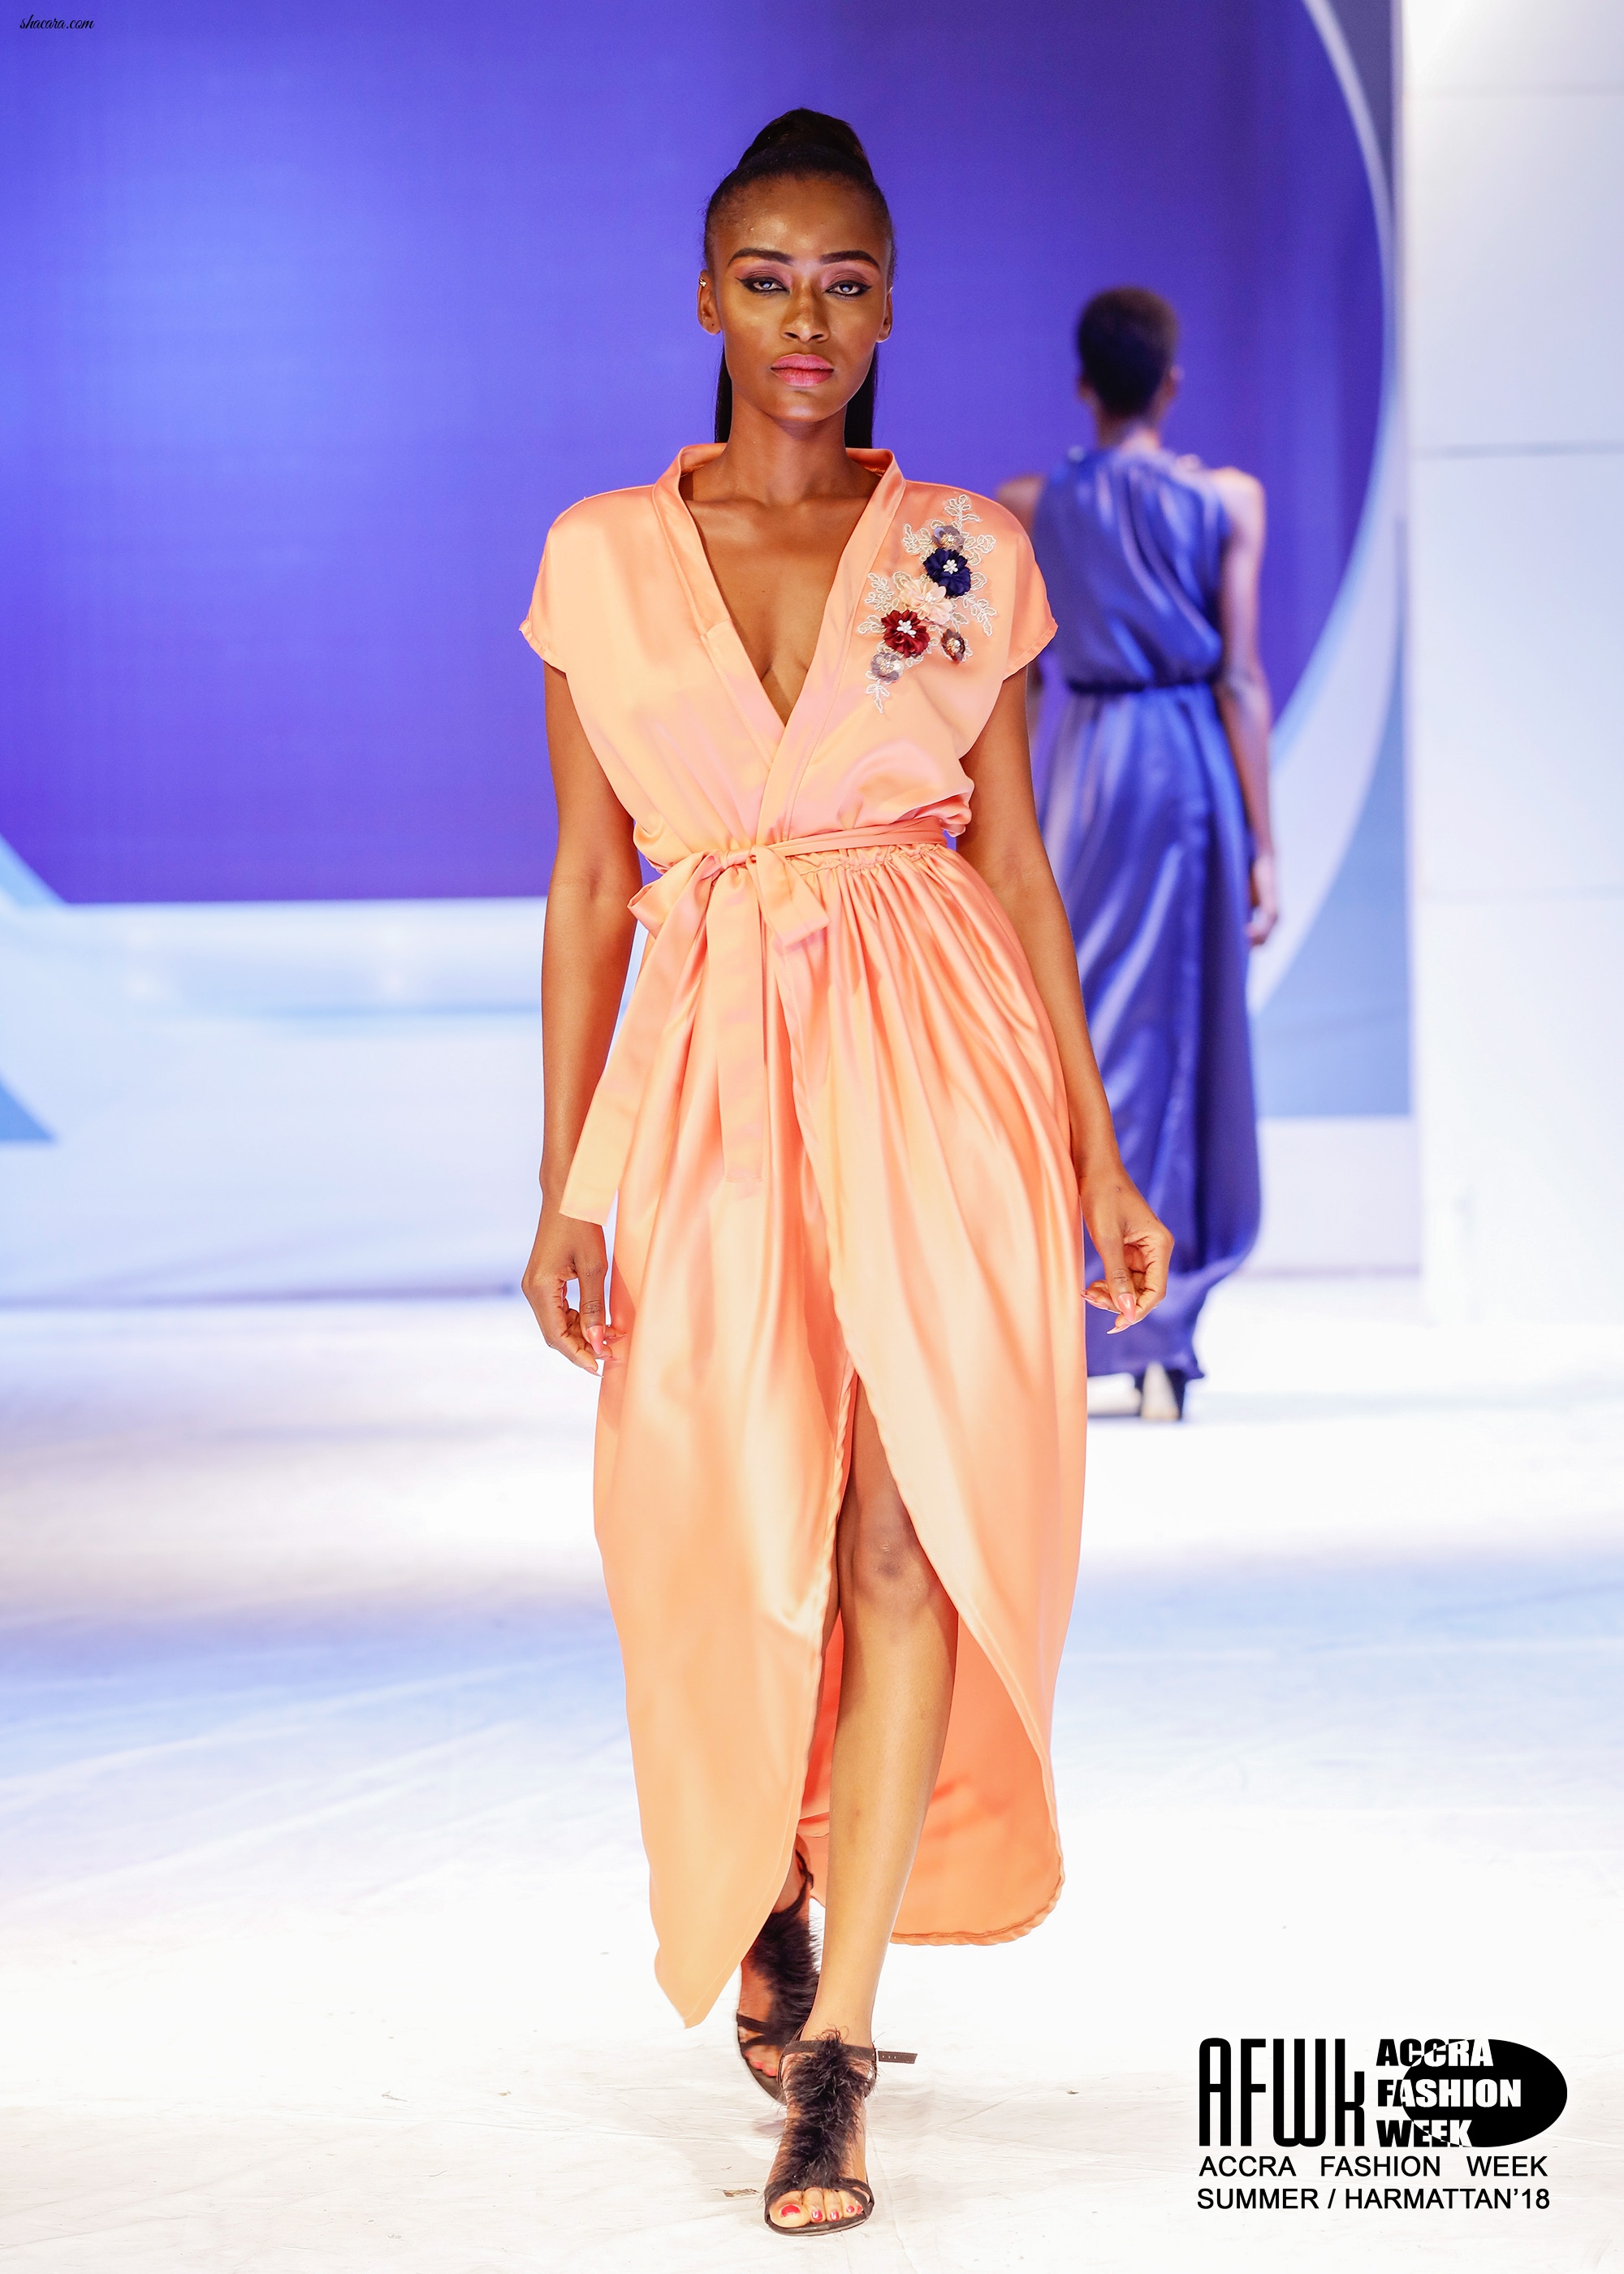 Africa Prepares For The Biggest Fashion Festival Set For In March, Accra Fashion Week!